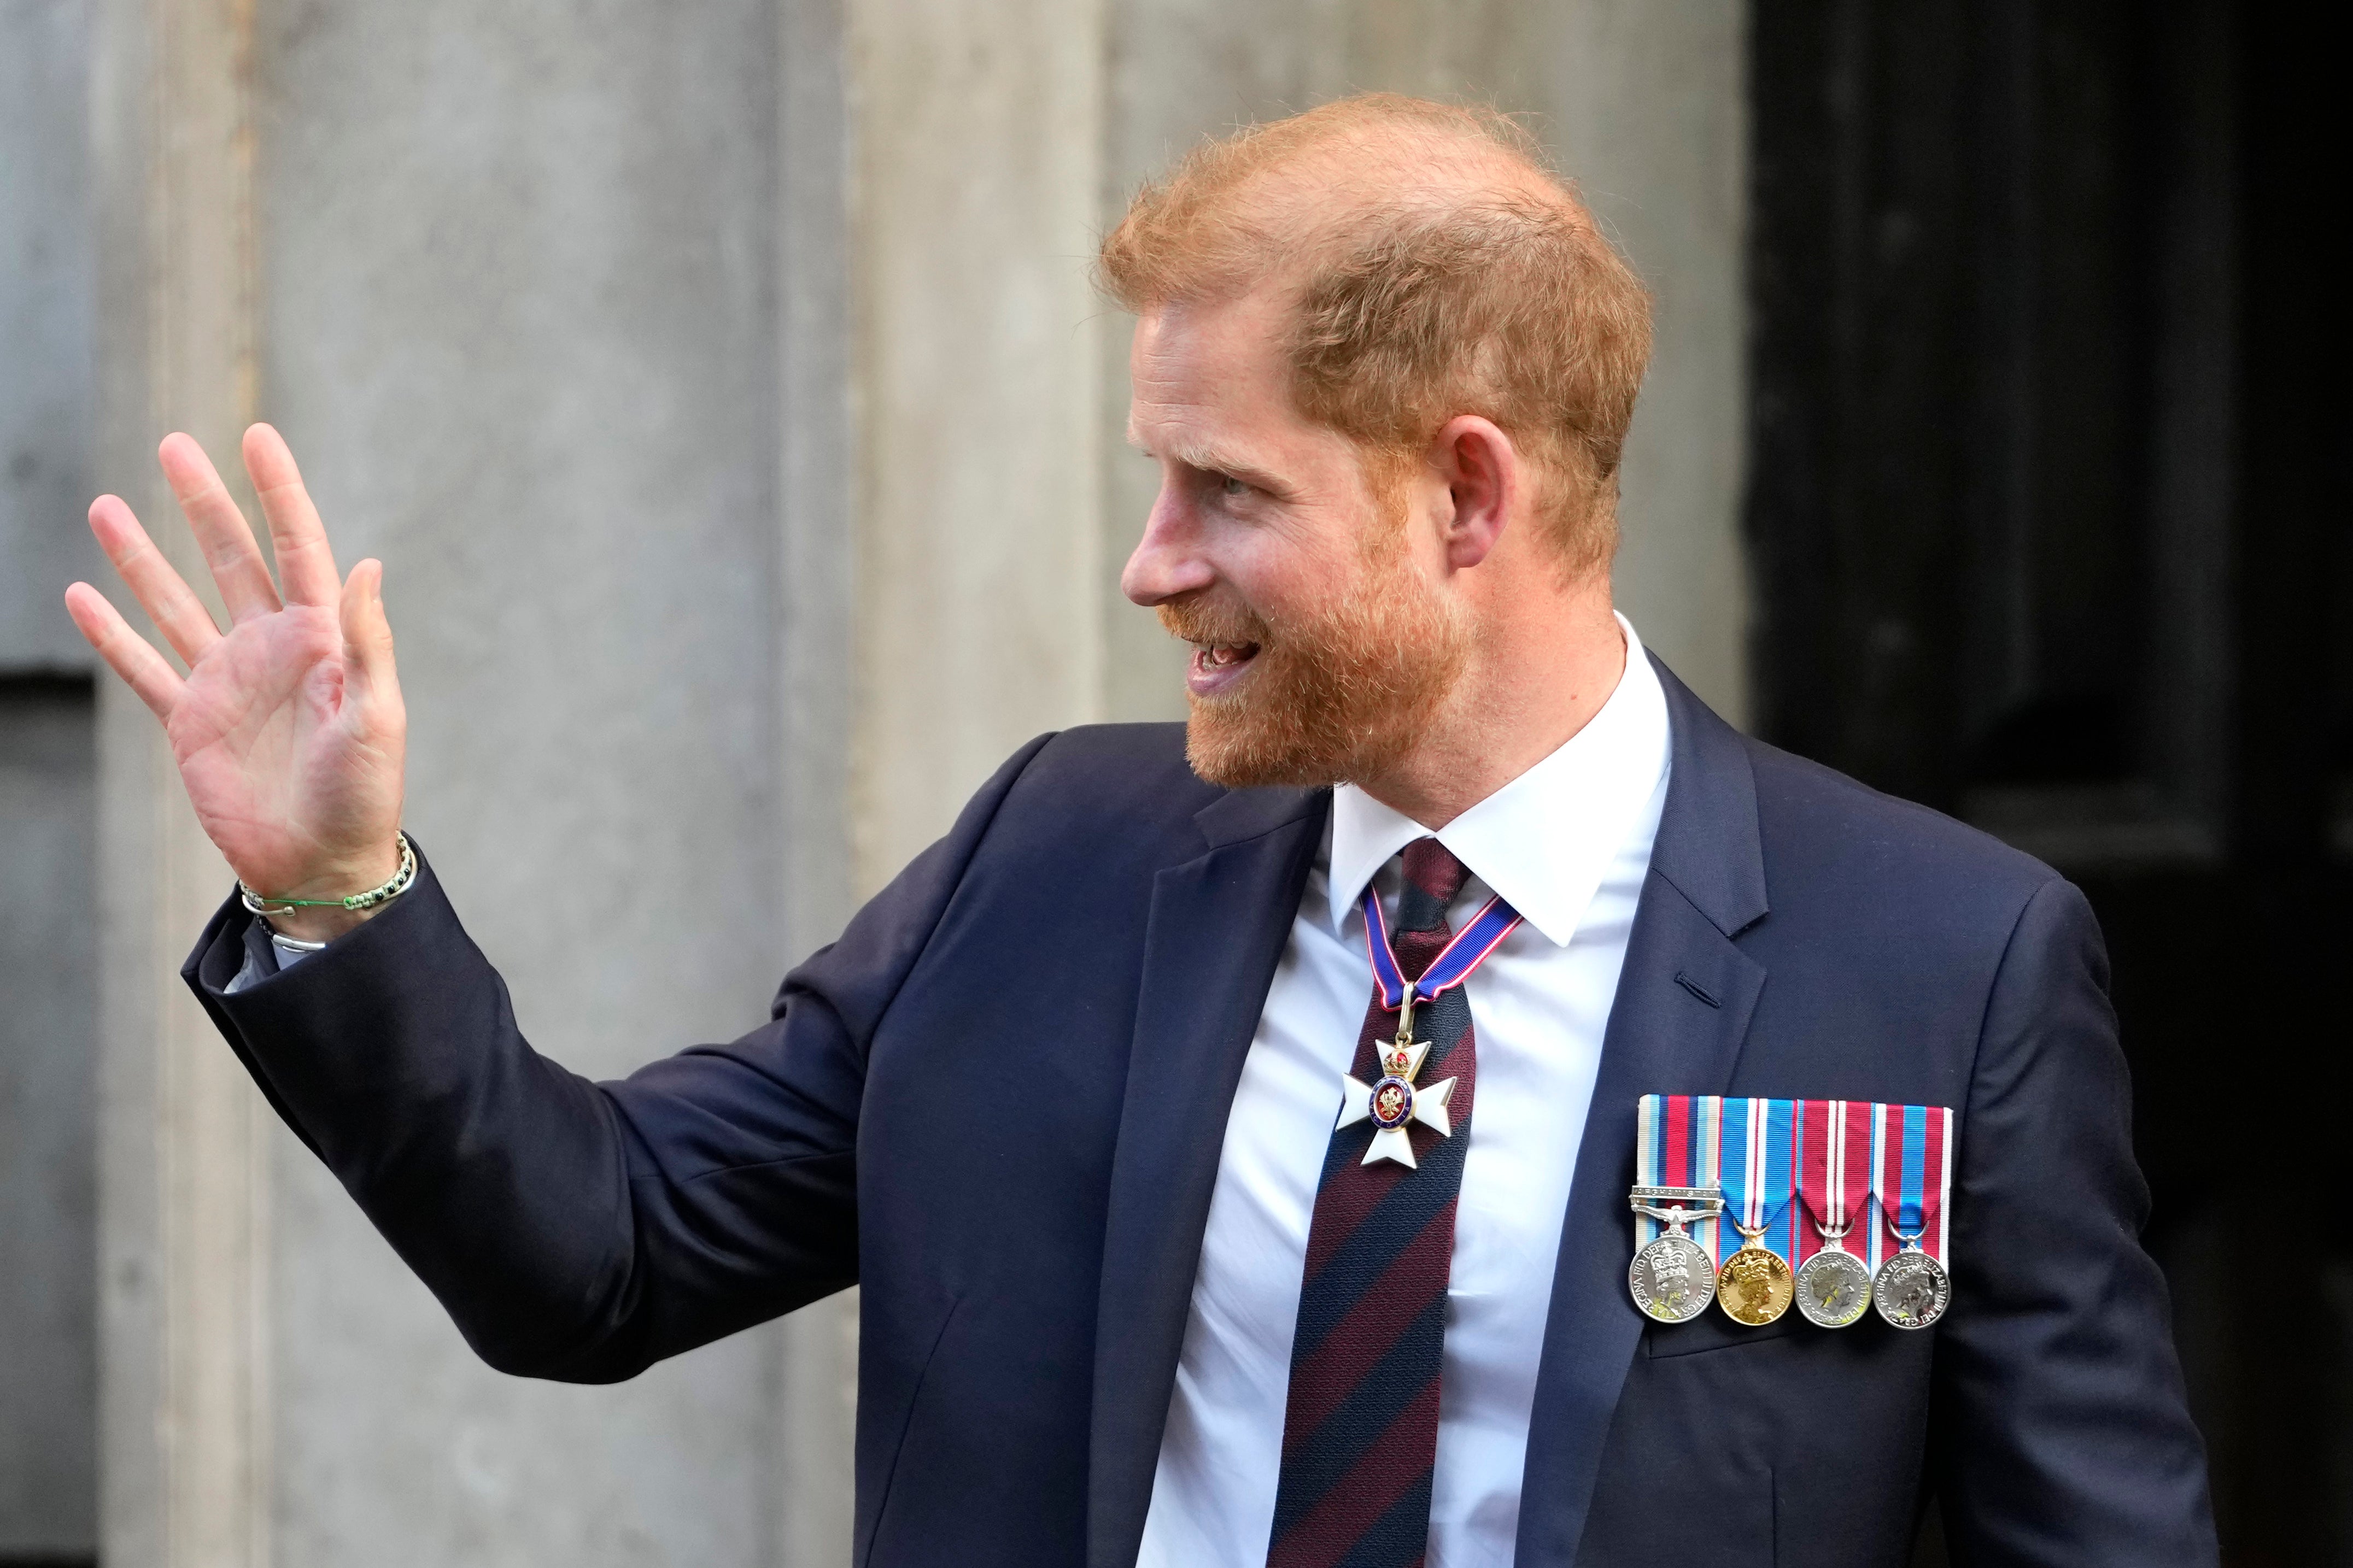 Prince Harry has not seen the King since learning of his cancer diagnosis in February